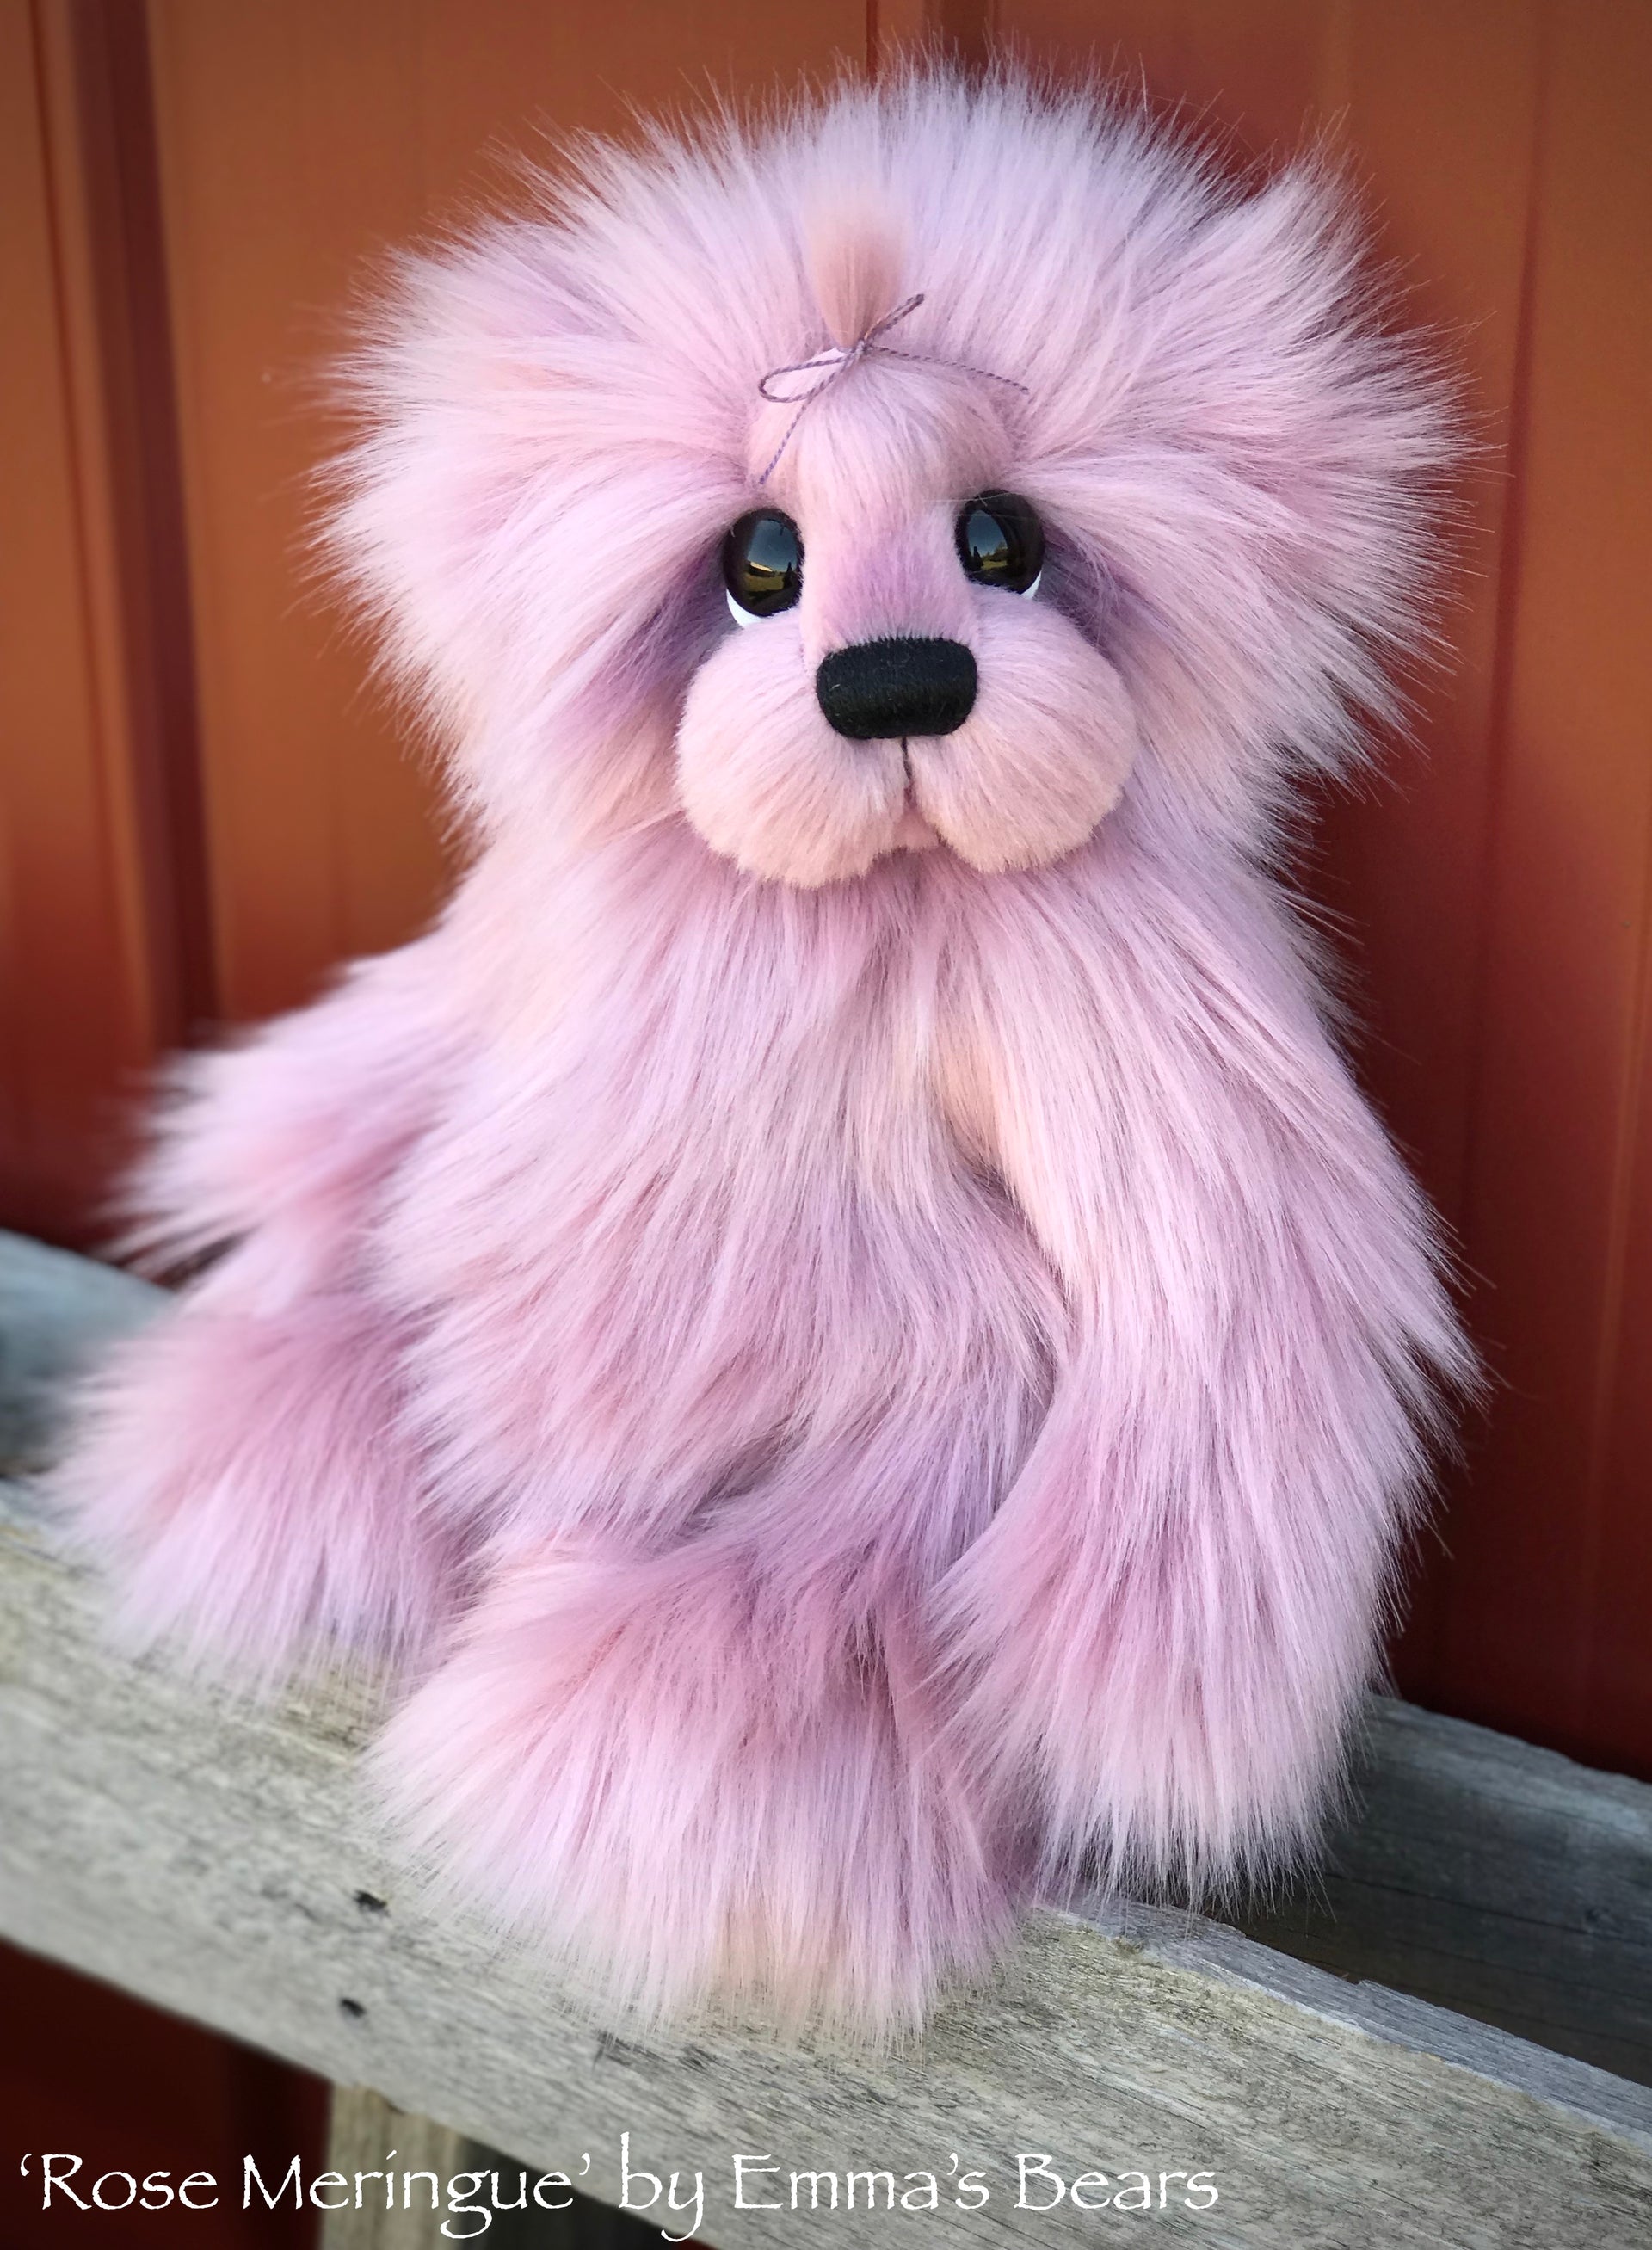 KITS - 13" jointed teddy using Emma's Bears FREE pattern - choose your own fur